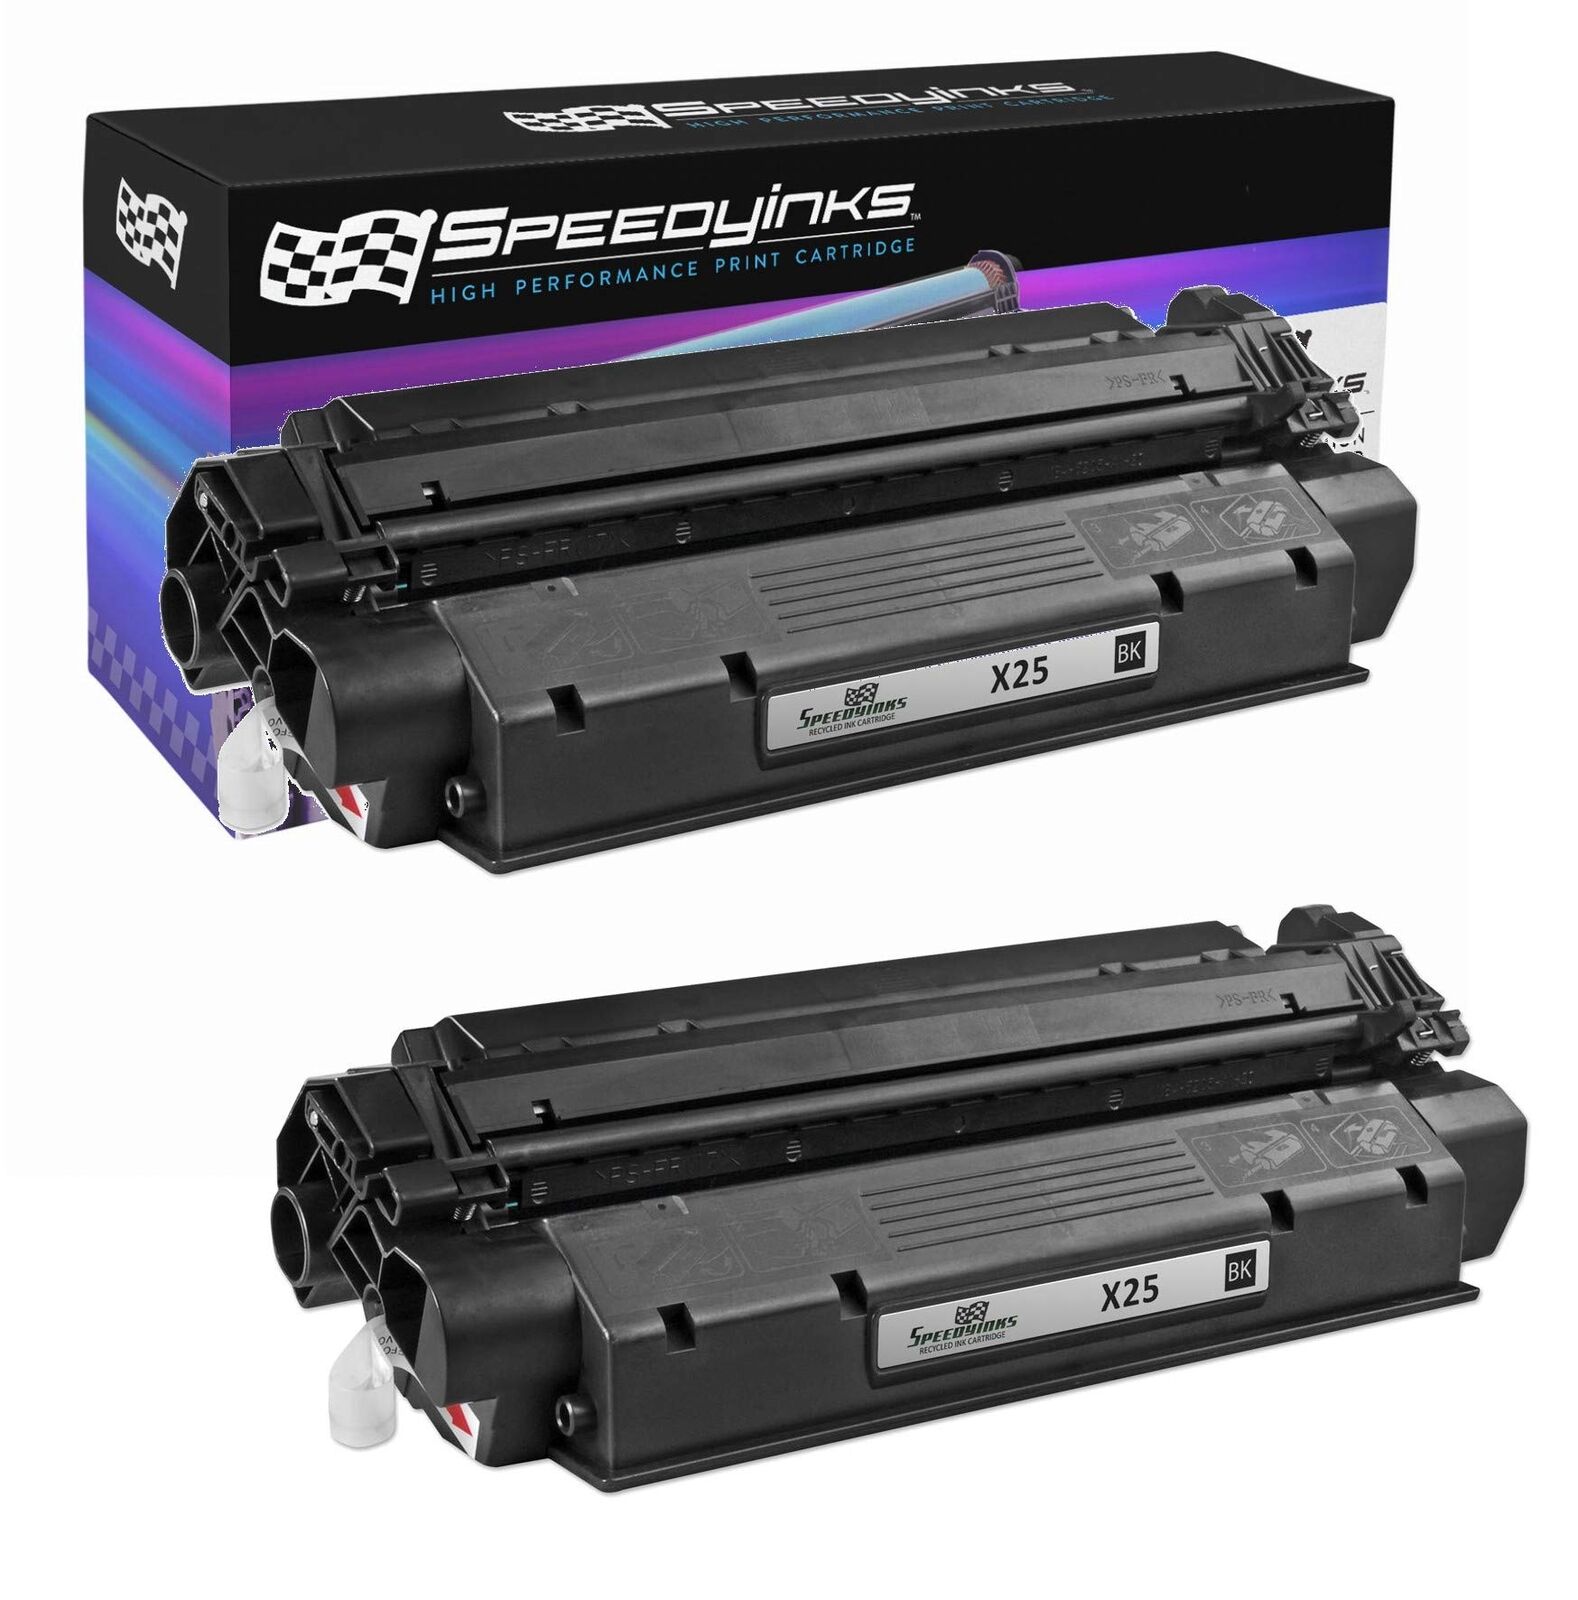 2 pack Reman Black Laser Toner Cartridge for Canon 8489A001AA X25